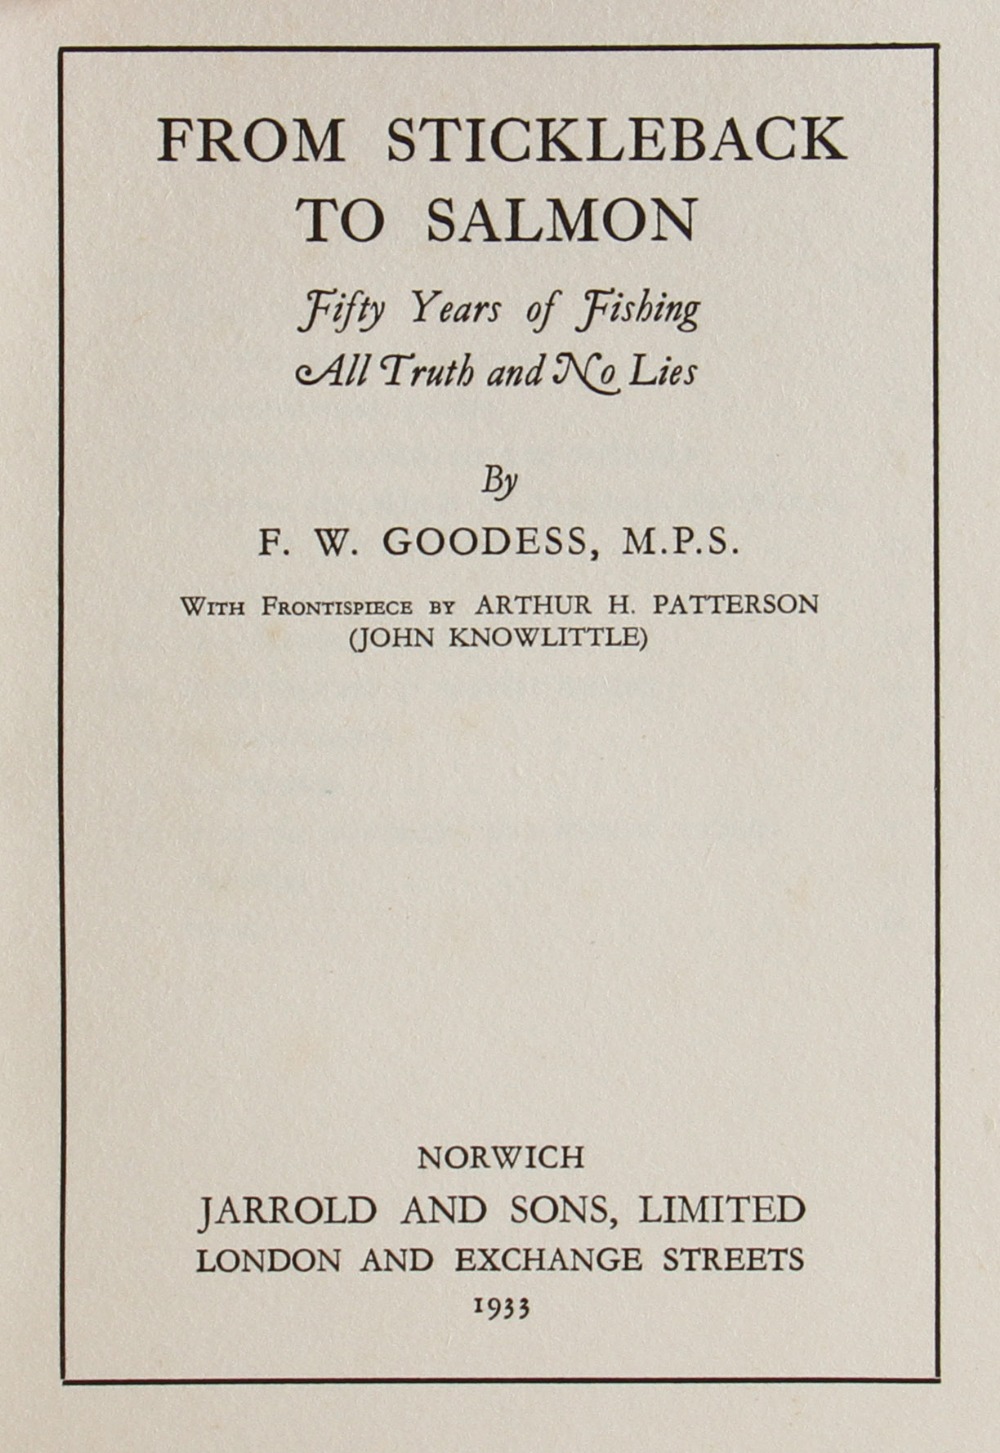 Goodess, F.W. - "From Stickleback To Salmon" Fifty Years of Fishing All Truth and No Lies, Norwich - Image 2 of 2